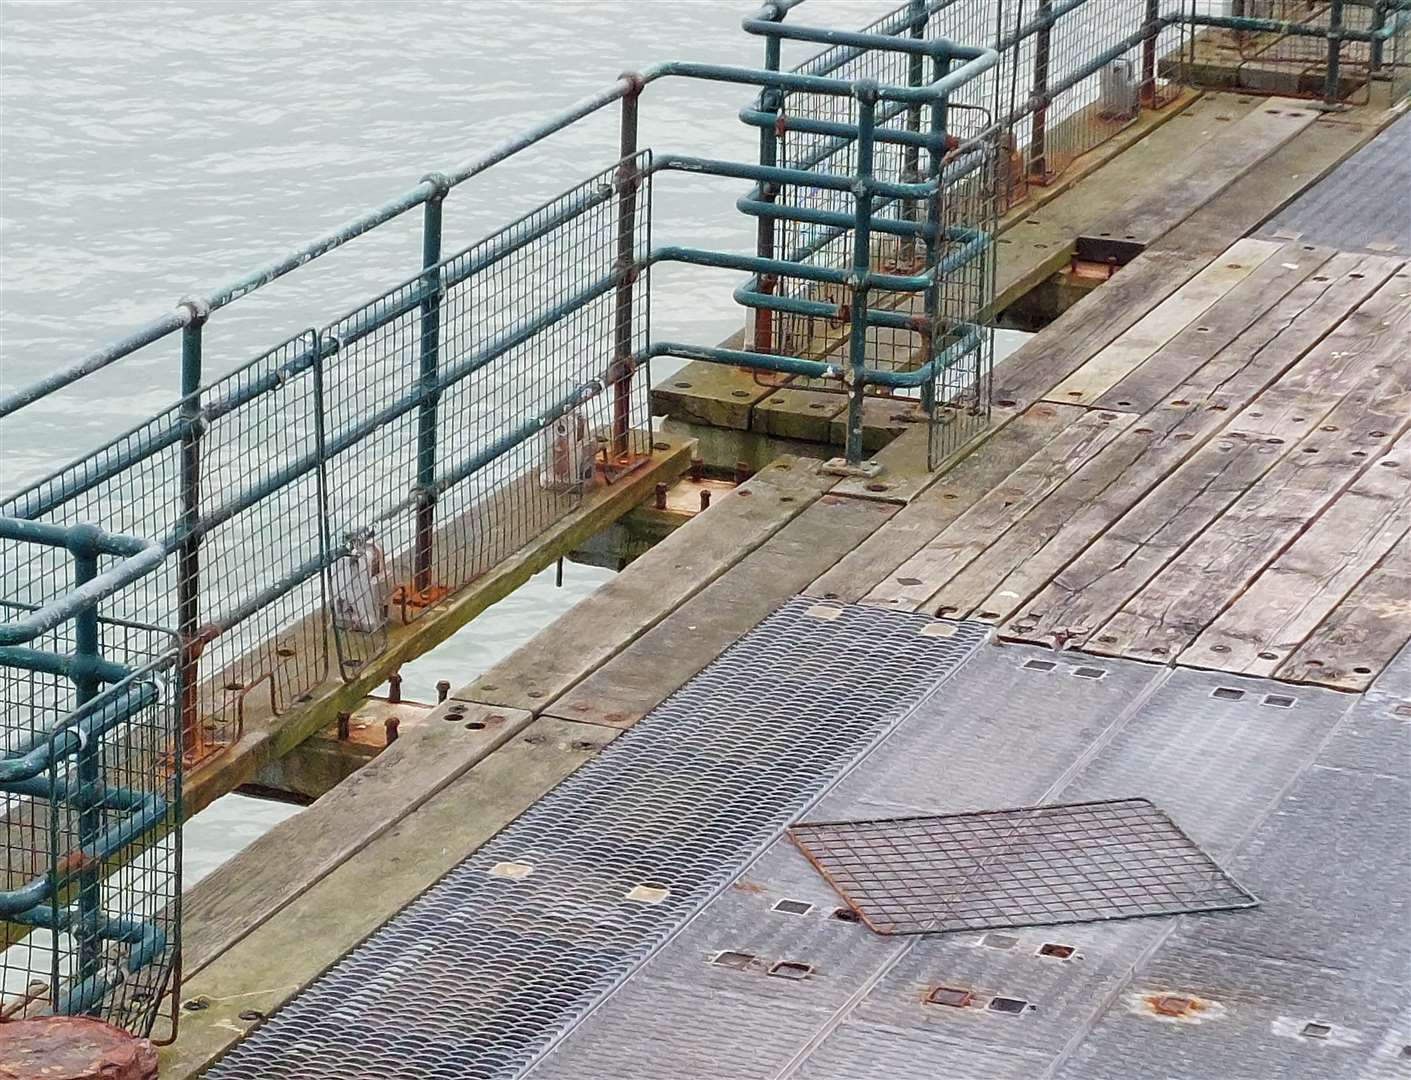 Part of the lower deck at Deal Pier is currently out of bounds